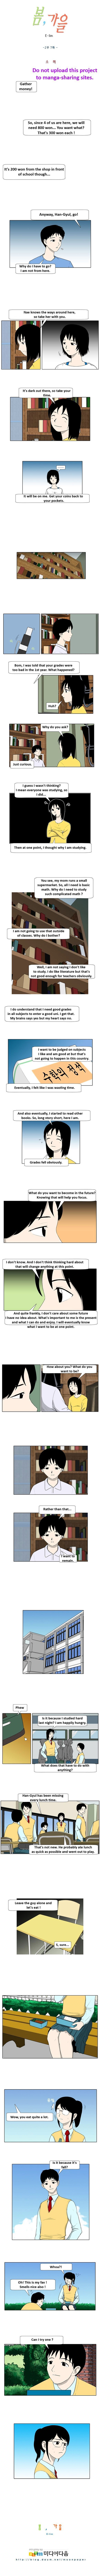 Spring, Fall - Page 1